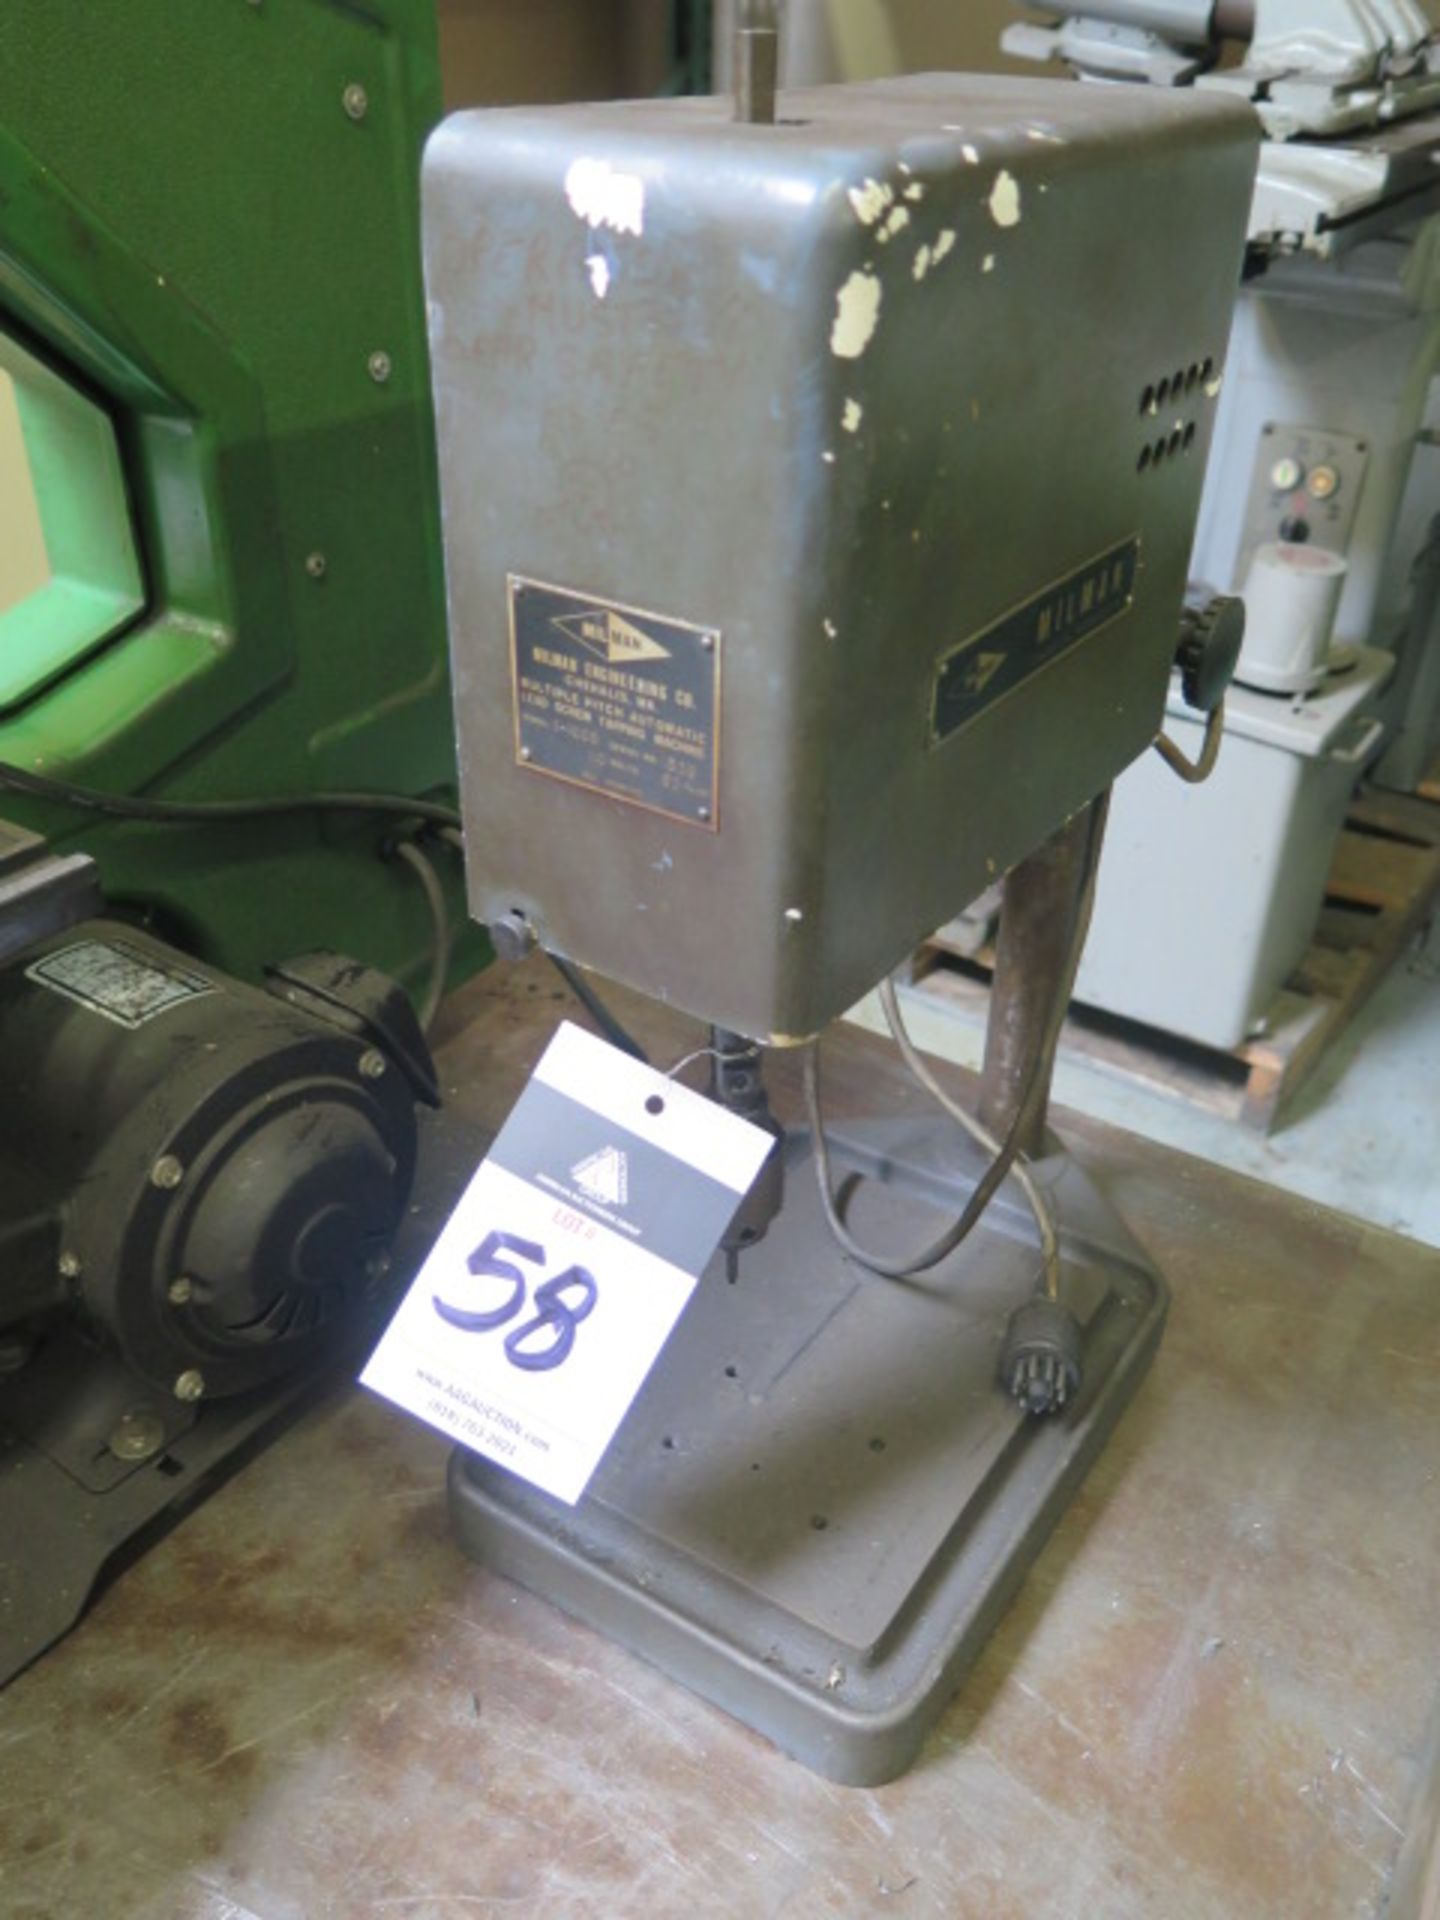 Milman mdl. T-100B Multiple Pitch Automatic Lead Screw Tapping Machine s/n 1309 (NO CONTROL UNIT)